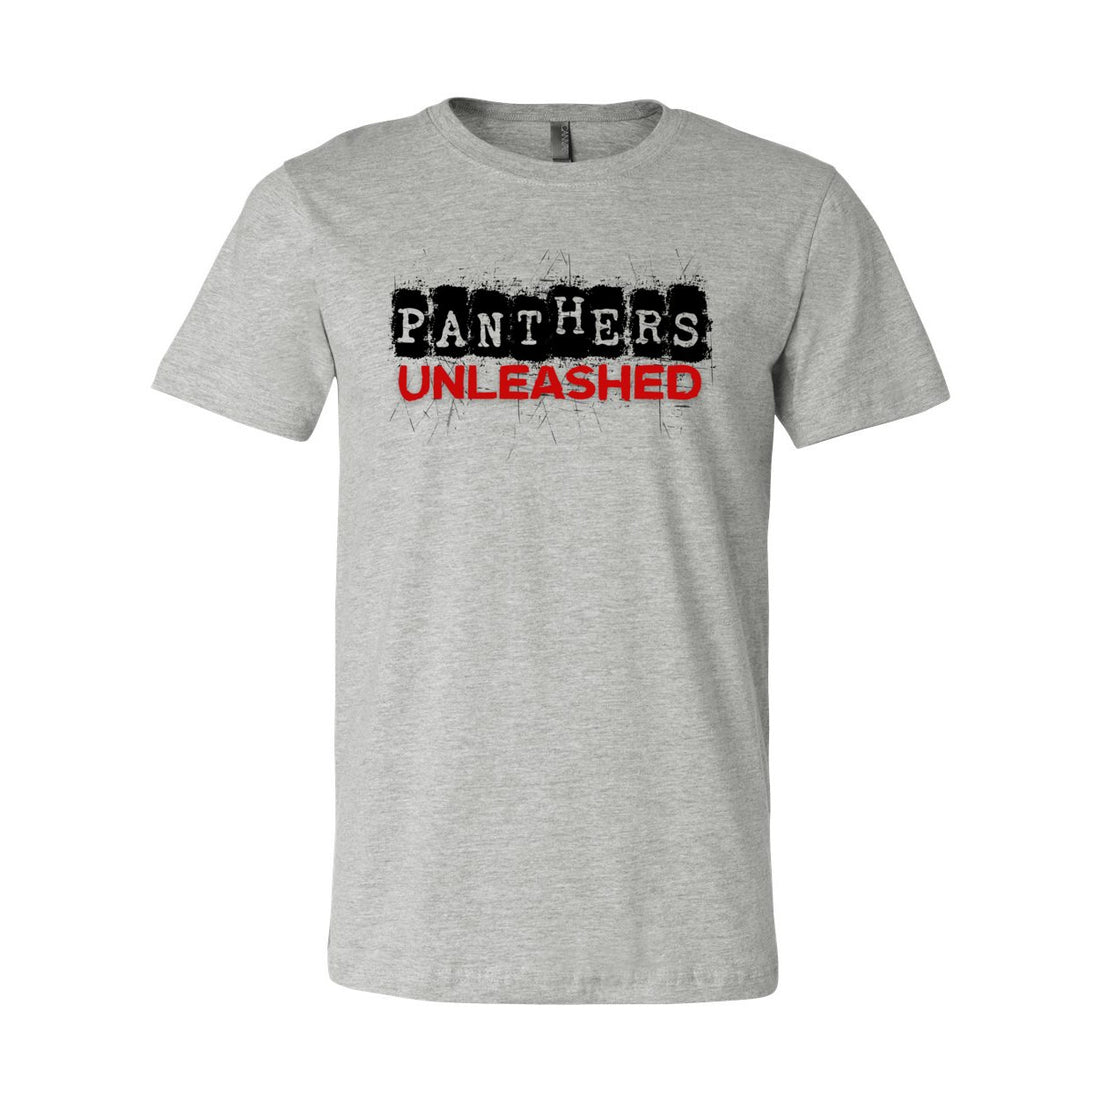 Panthers Unleashed Short Sleeve Jersey Tee - T-Shirts - Positively Sassy - Panthers Unleashed Short Sleeve Jersey Tee